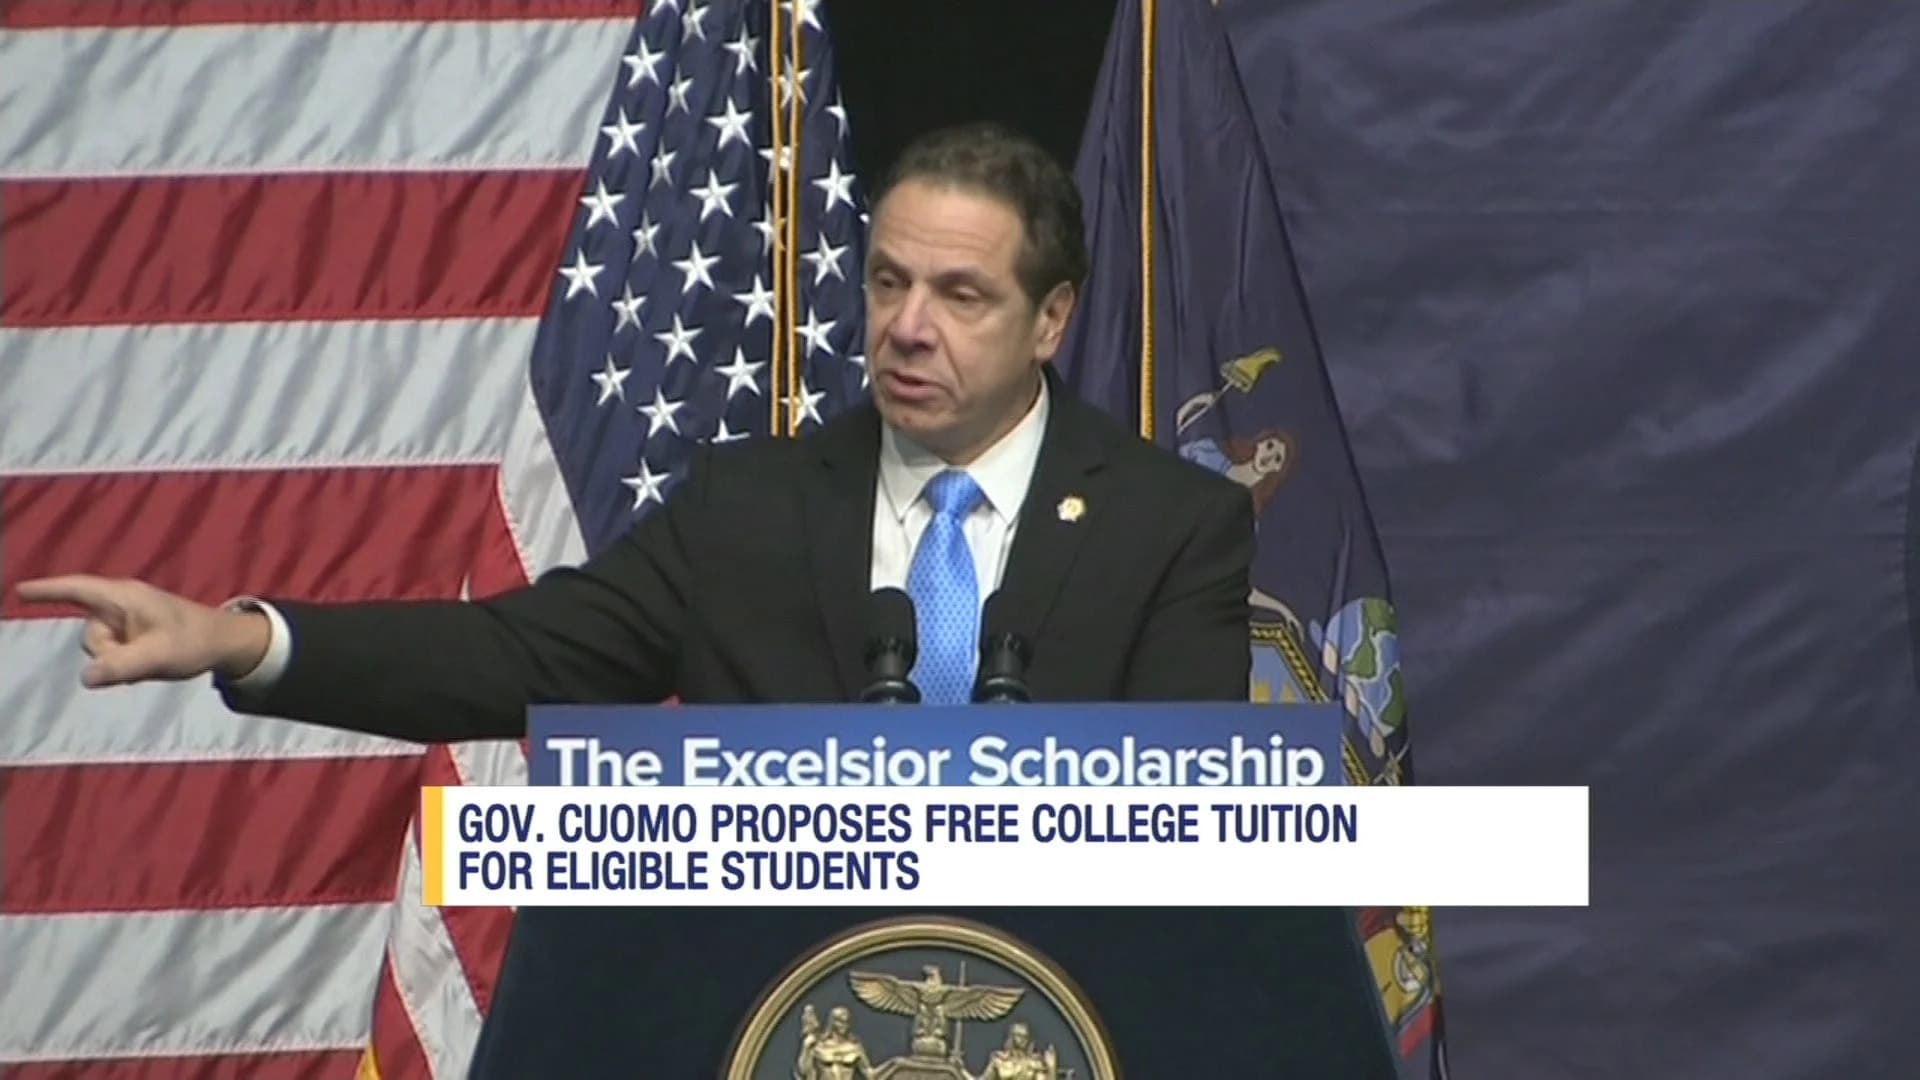 Gov. Cuomo calls for free tuition at NY public colleges